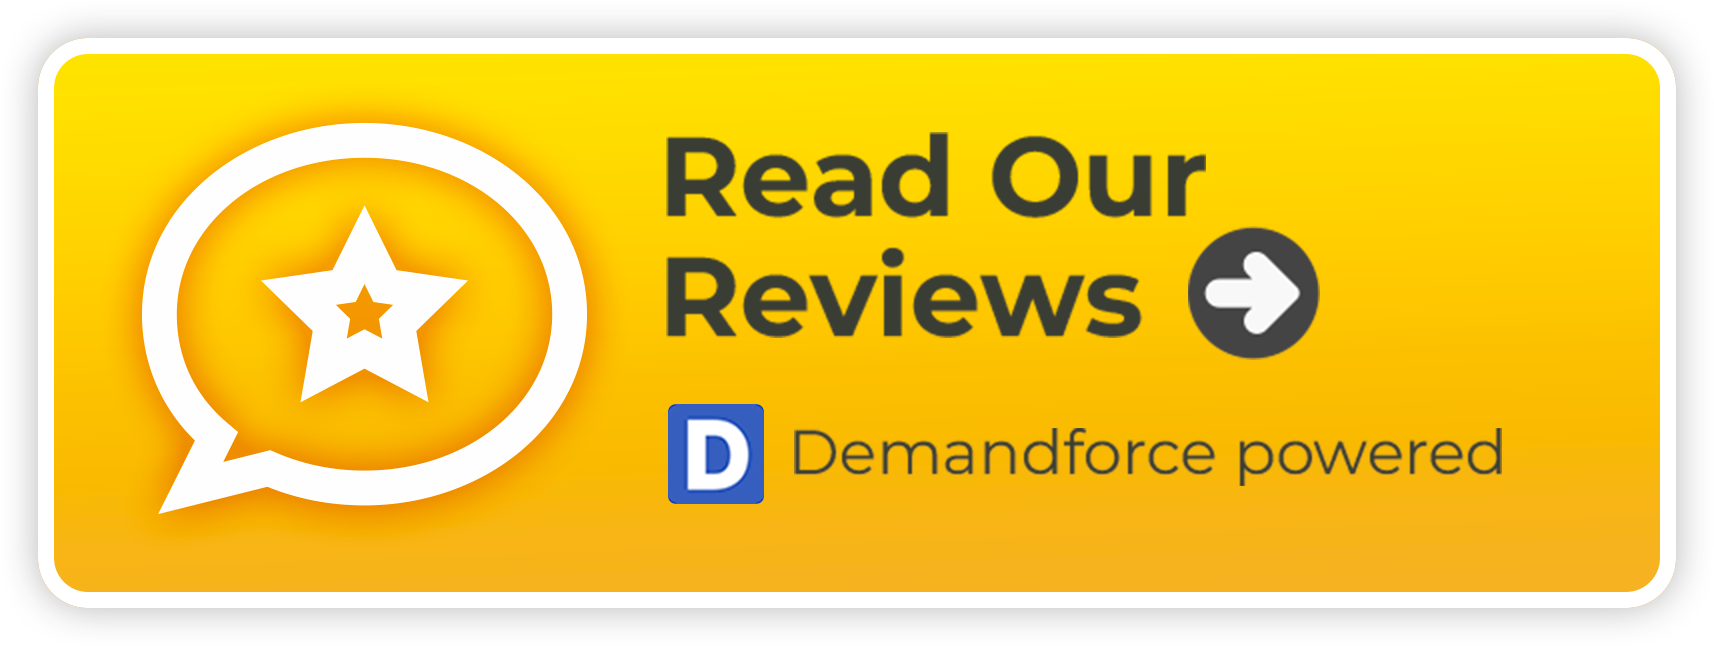 Read our Reviews - Demandforce powered